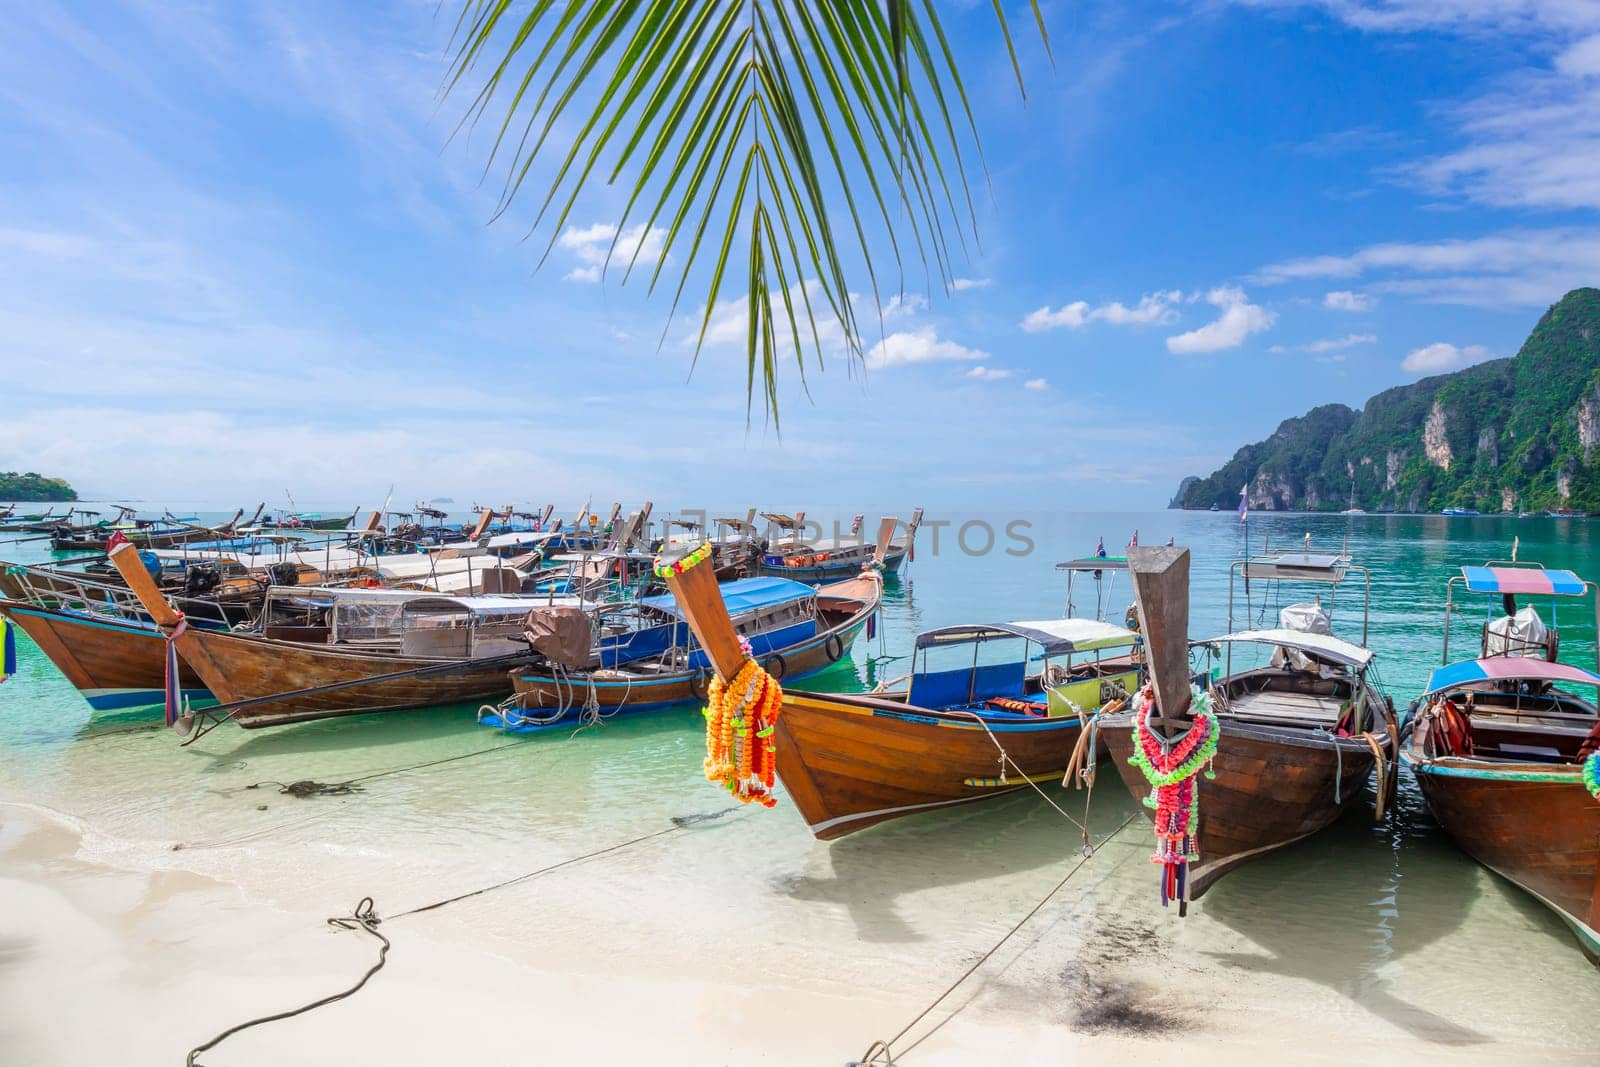 The Thai traditional wooden longtail boat and beautiful beach in Phuket province, Thailand. by Gamjai